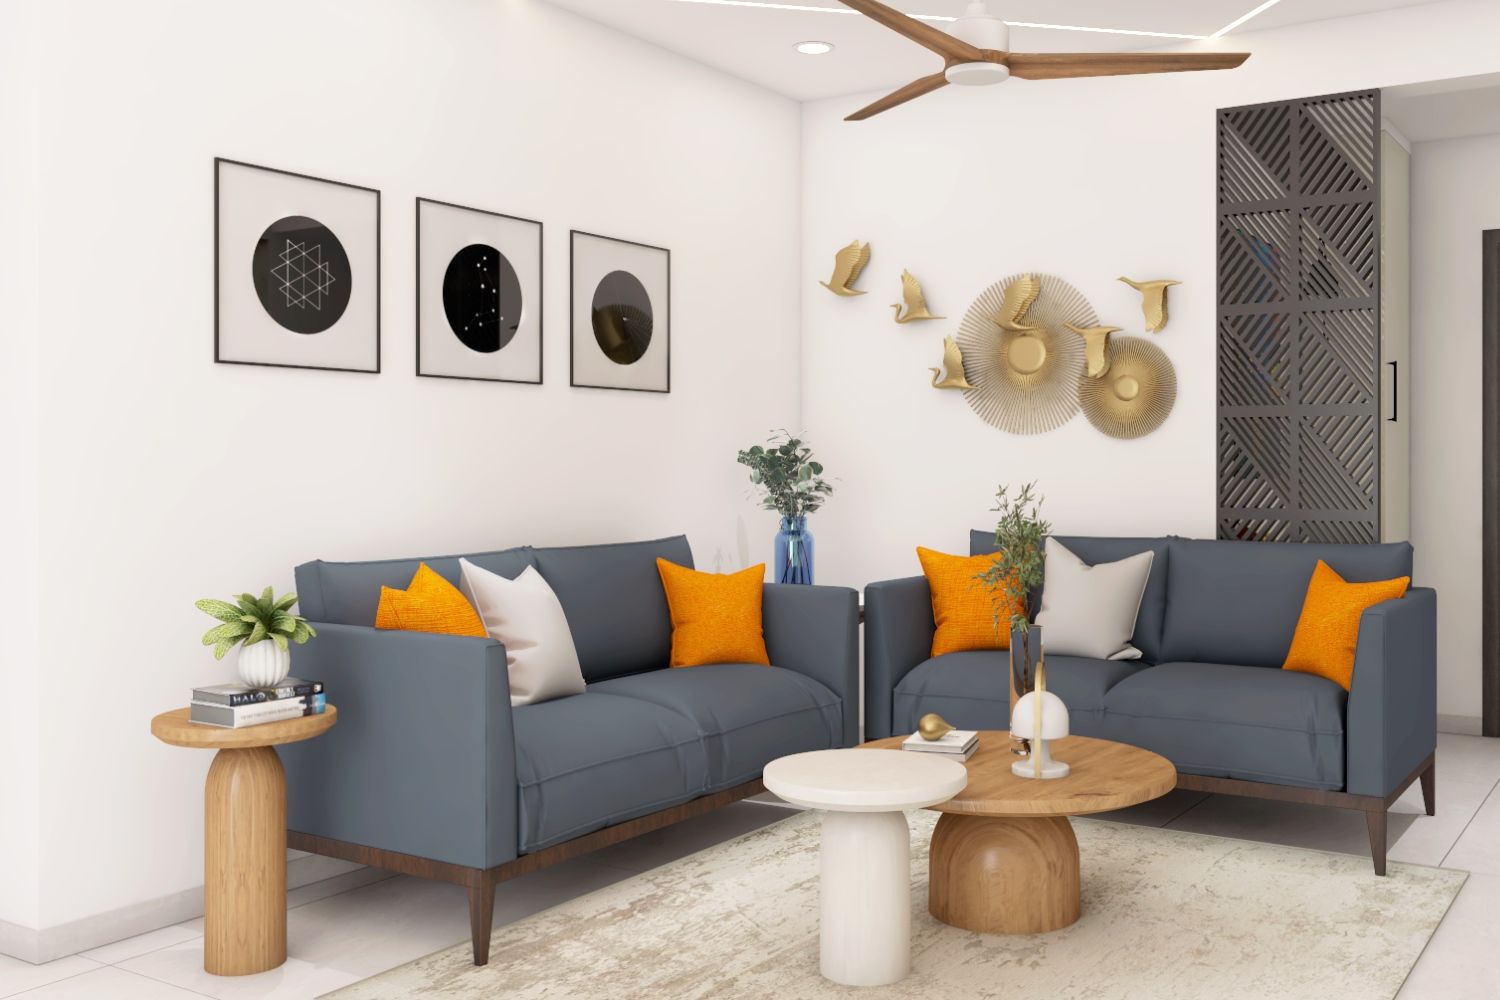 Modern Living Room Design With Grey Upholstered Sofa And 2-Tiered Wooden Coffee Table